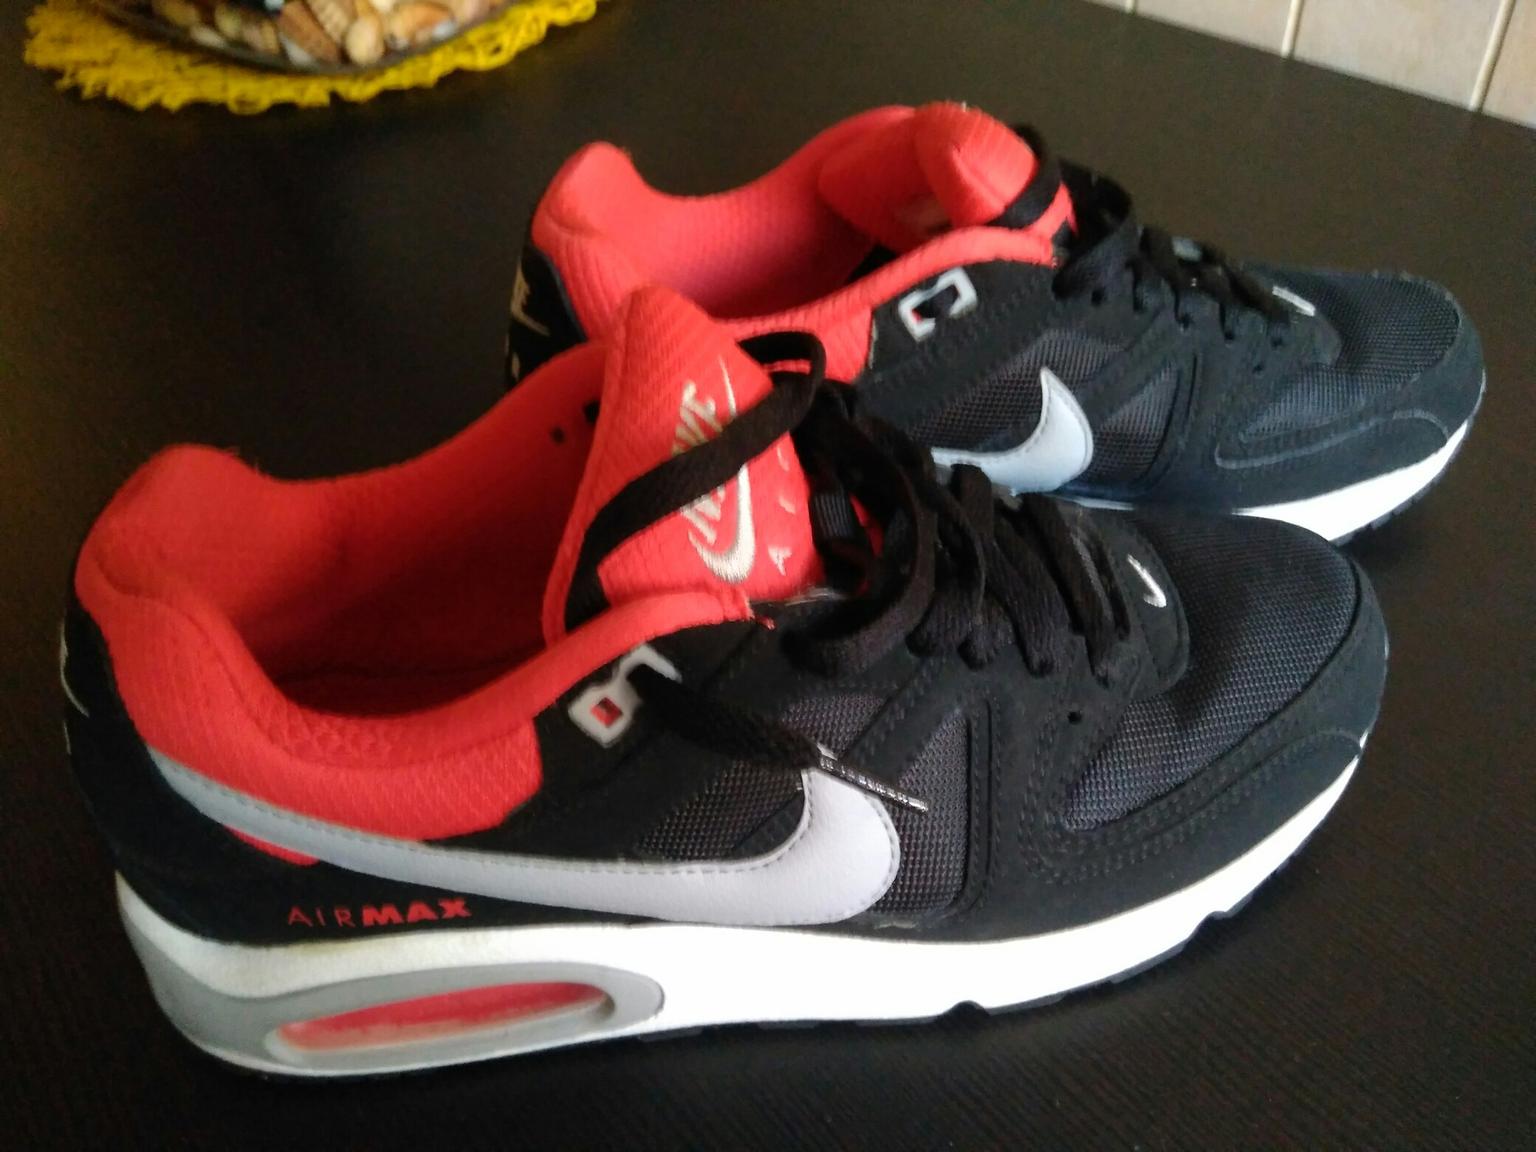 Scarpe Nike Air in 00133 Roma for €40.00 for sale | Shpock